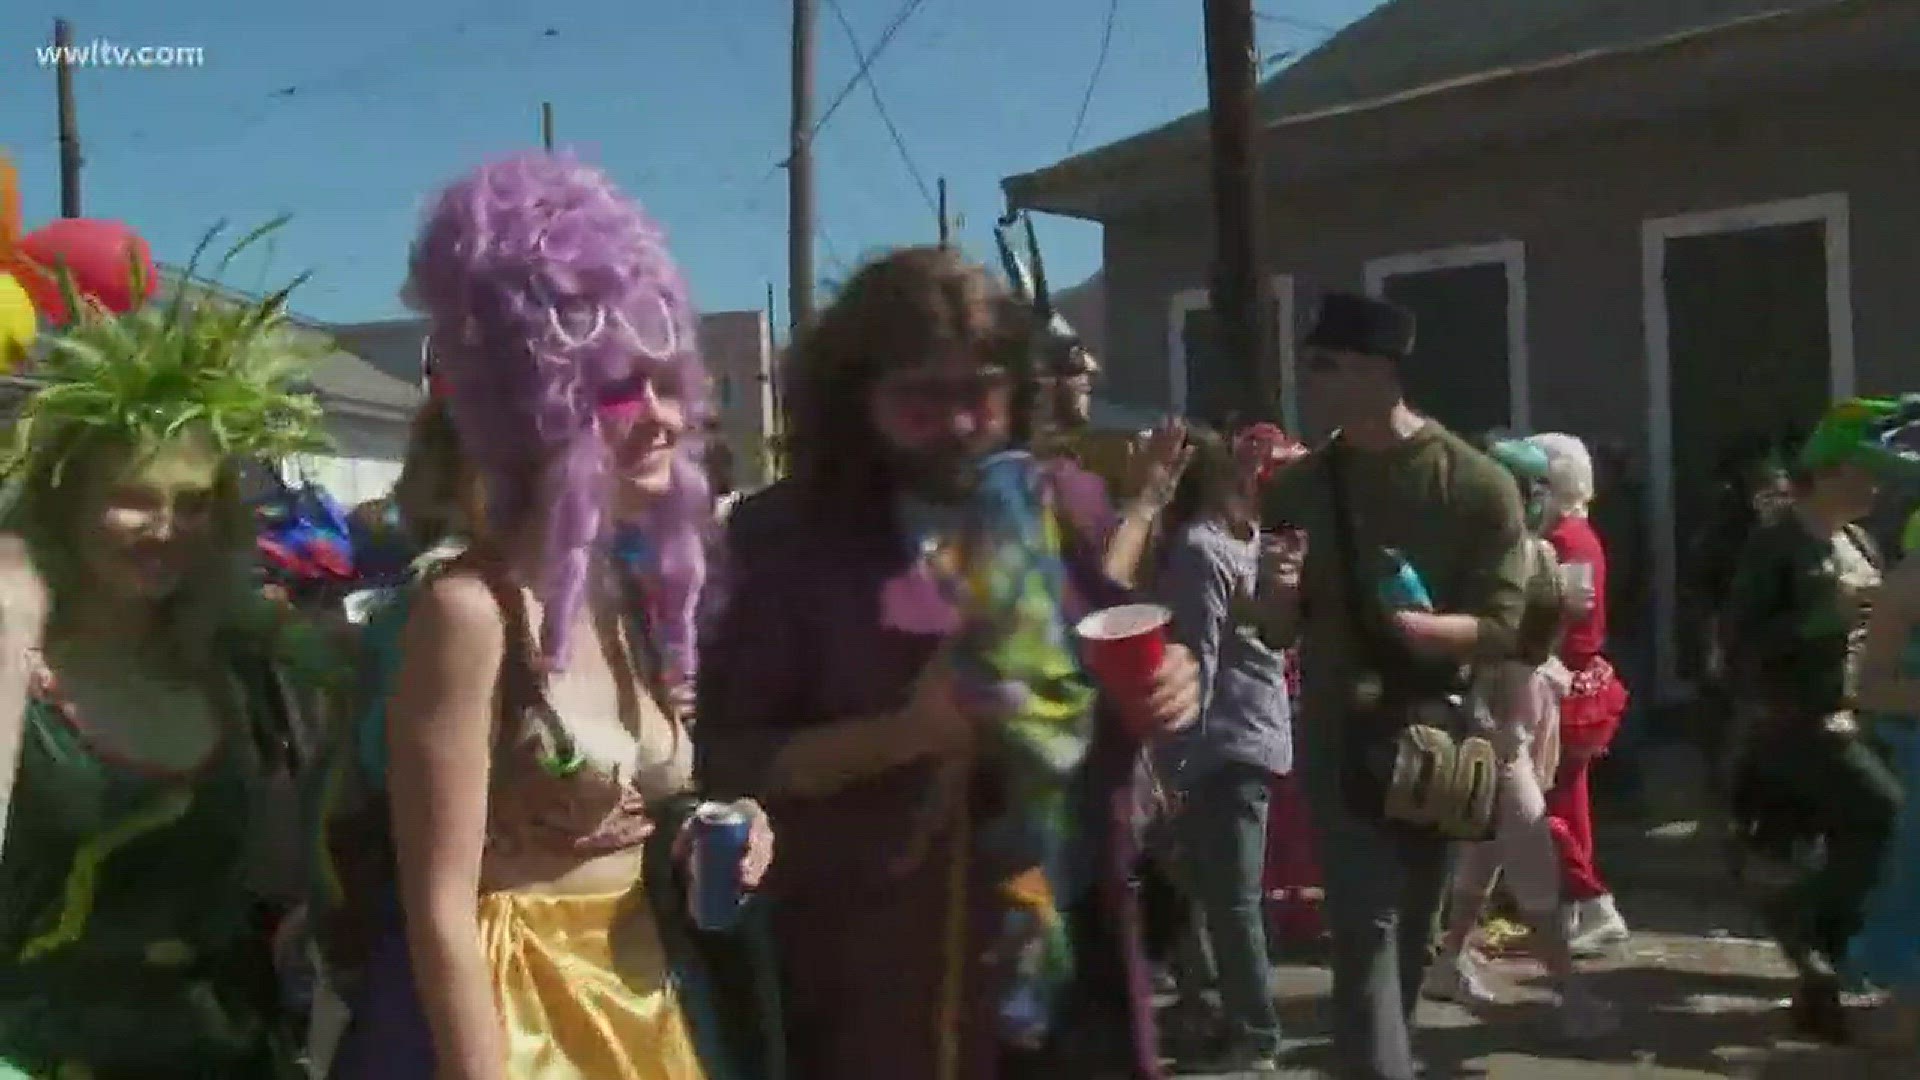 If you were looking for the wilder and alternative side of Mardi Gras, the Marigny was the place to be.